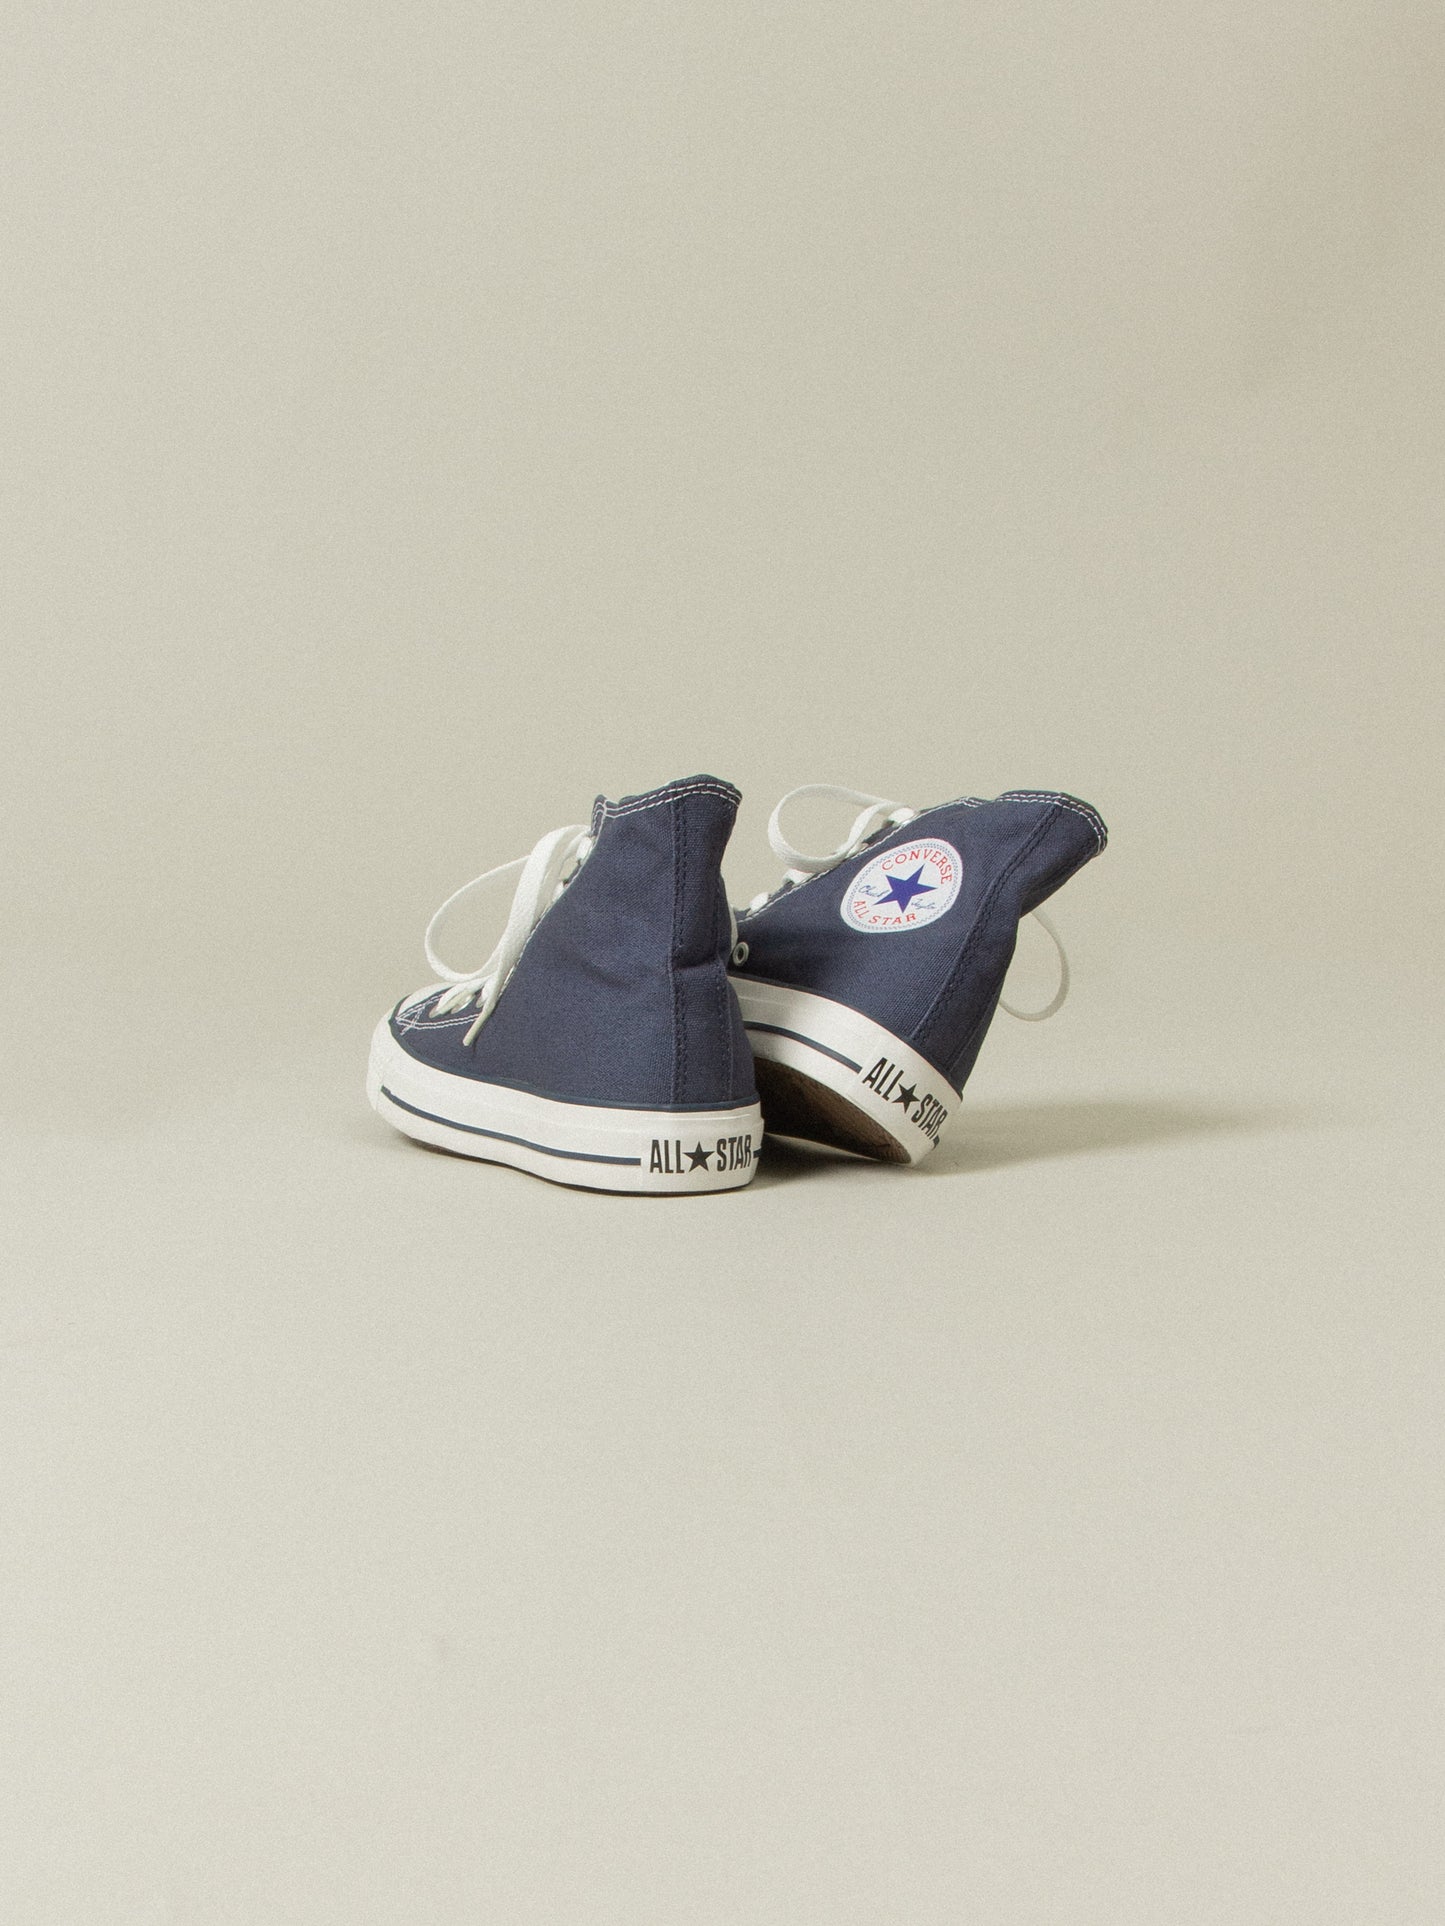 NOS Early 2000s Converse All Star - Navy